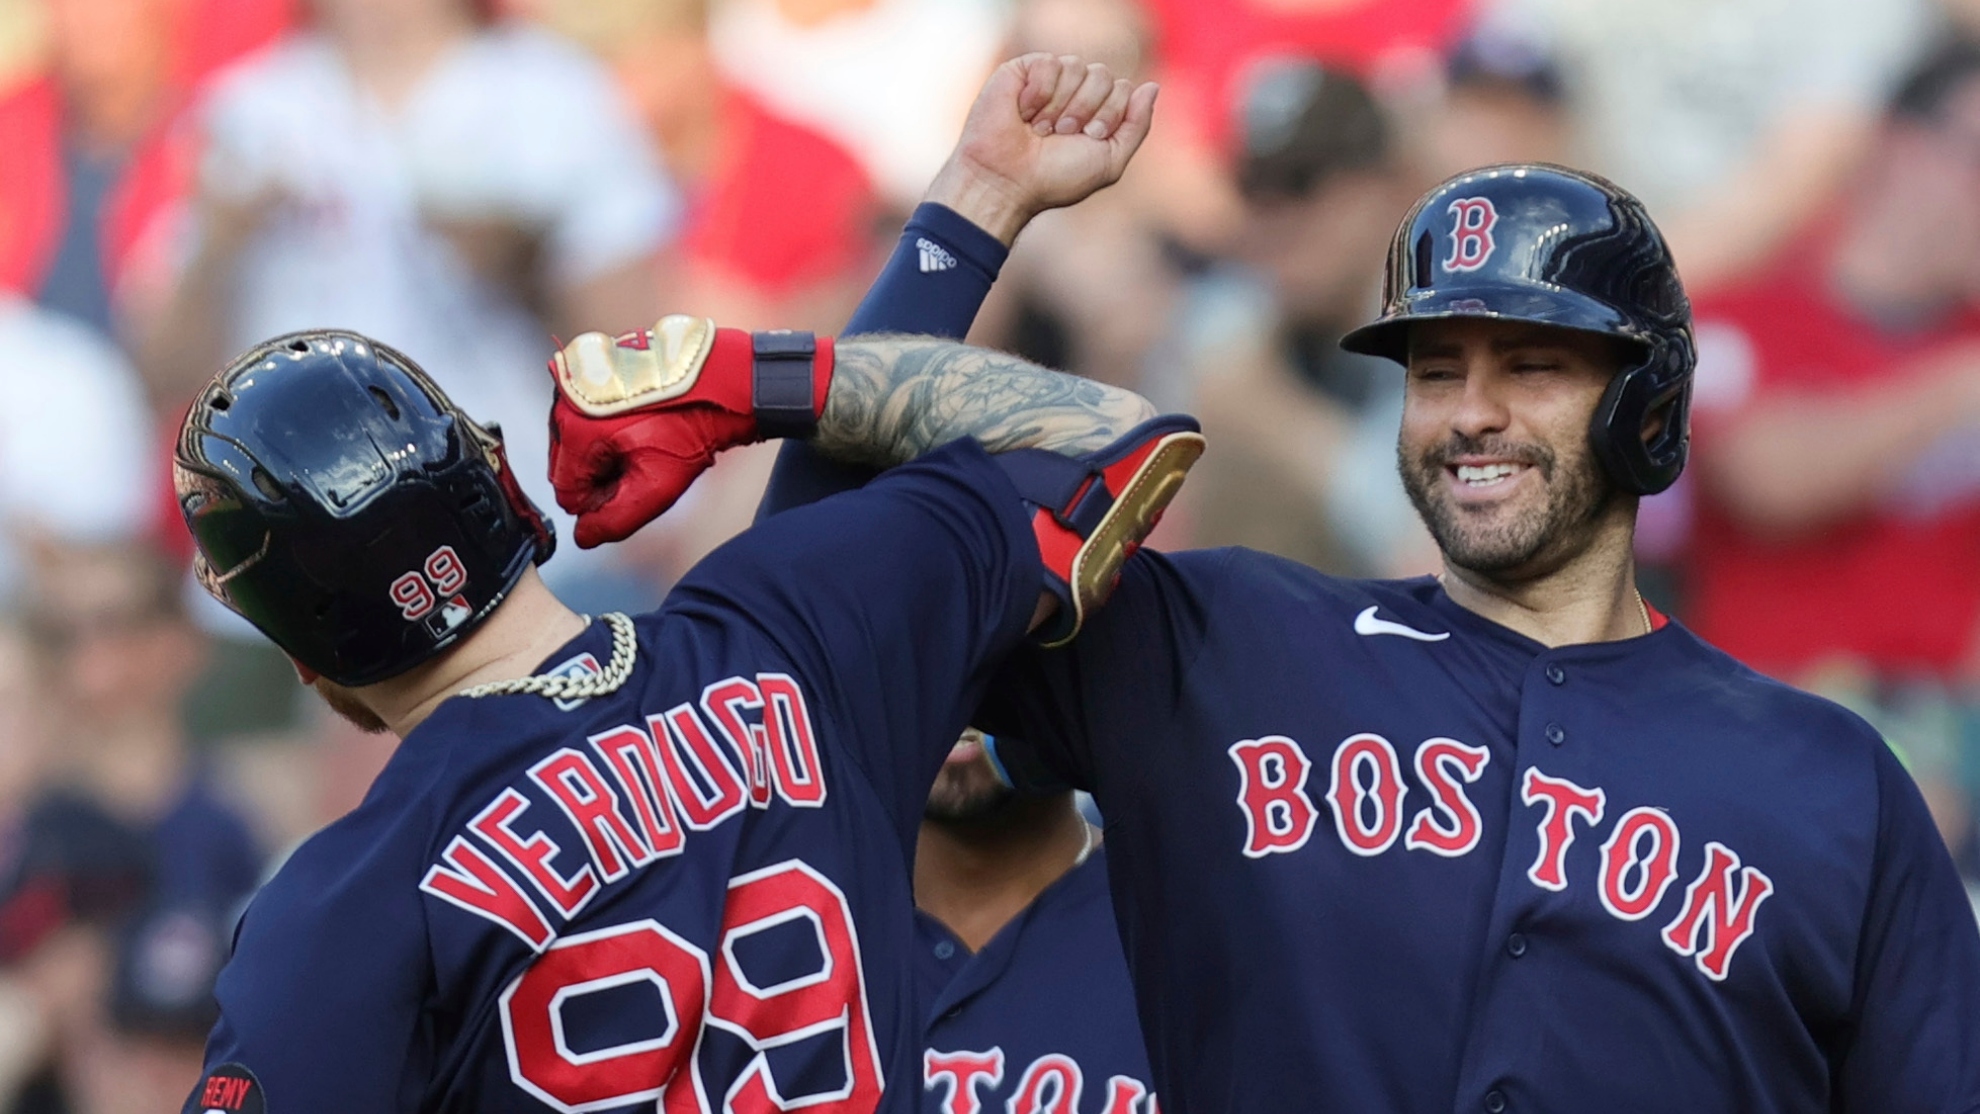 Boston Red Soxs J.D. Martinez, right, celebrates a three-run home run by Alex Verdugo (99) against the Cleveland Guardians during the sixth inning of a baseball game Saturday, June 25, 2022, in Cleveland. (John Kuntz/Cleveland.com via AP)